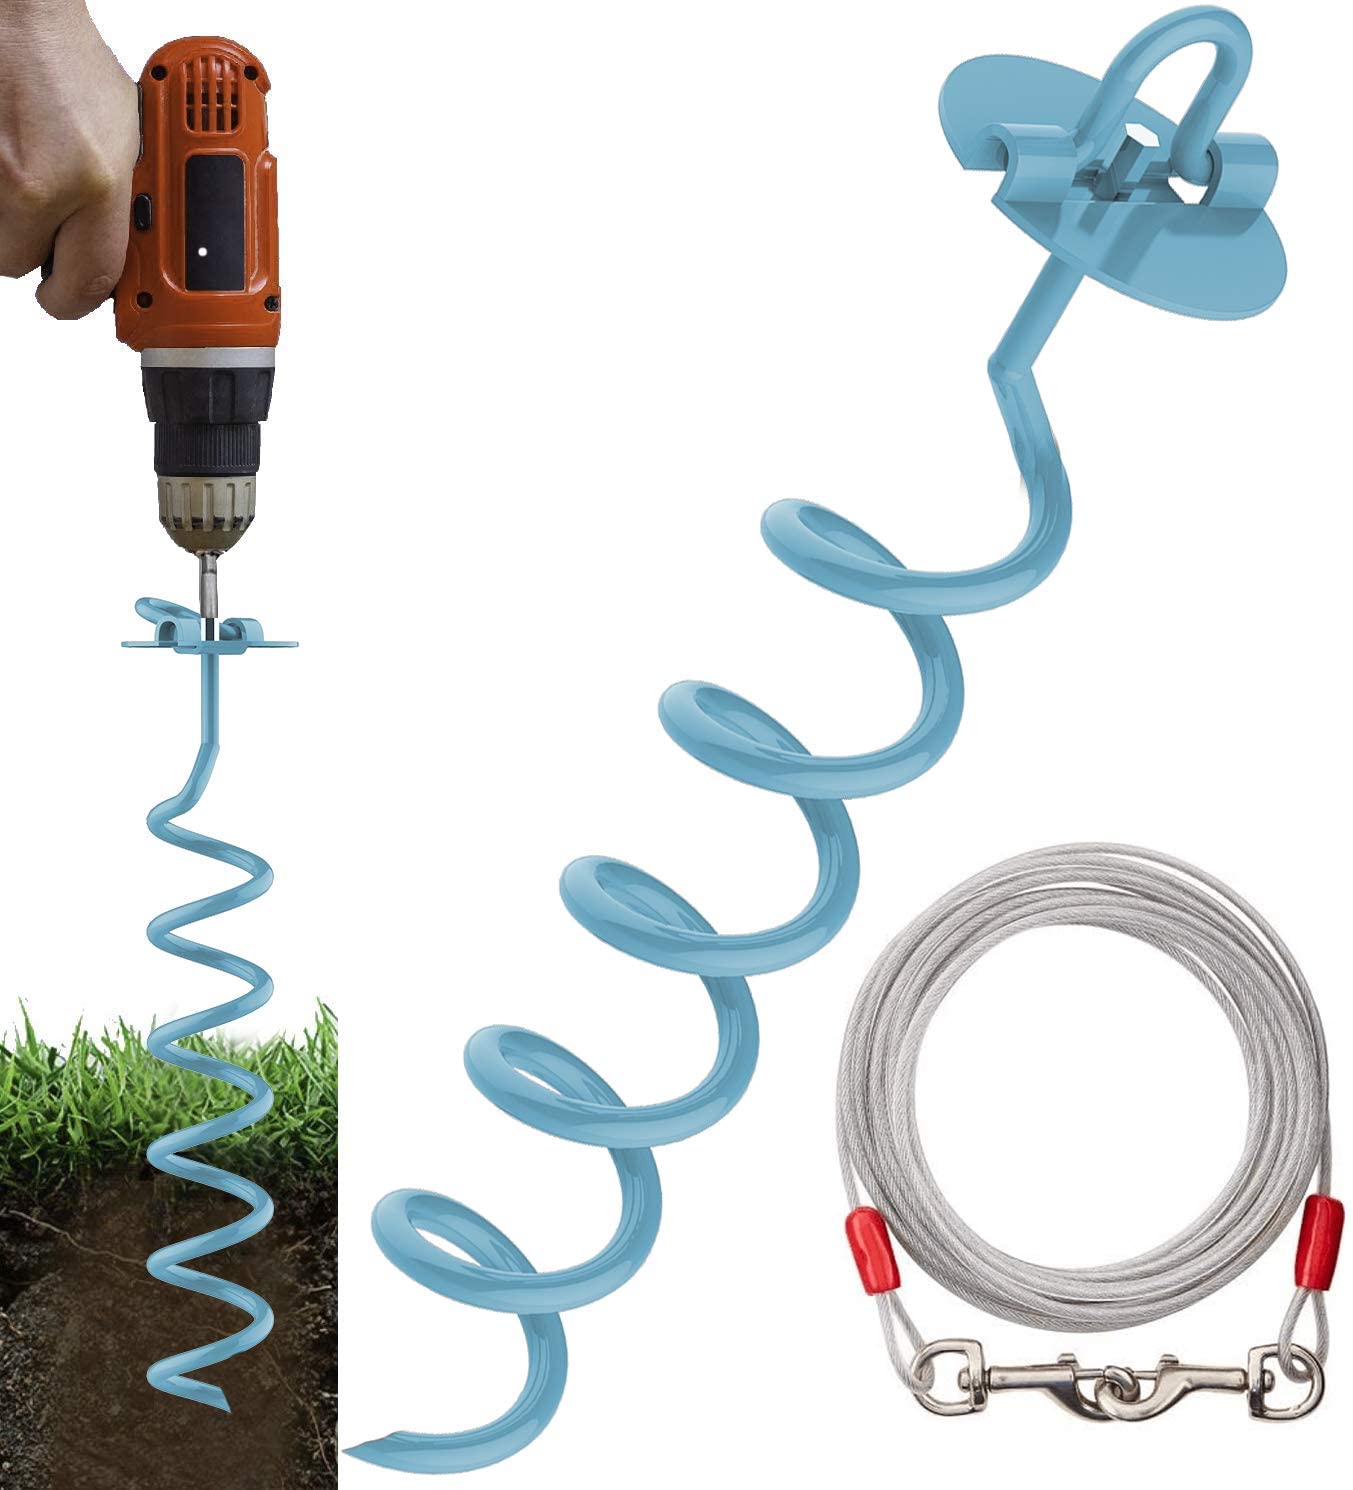 Eurmax 16inch Up to 500lbs Spiral Dog Tie Out Ground Spiral Anchor Stake Ideal for All Kinds of Pets.